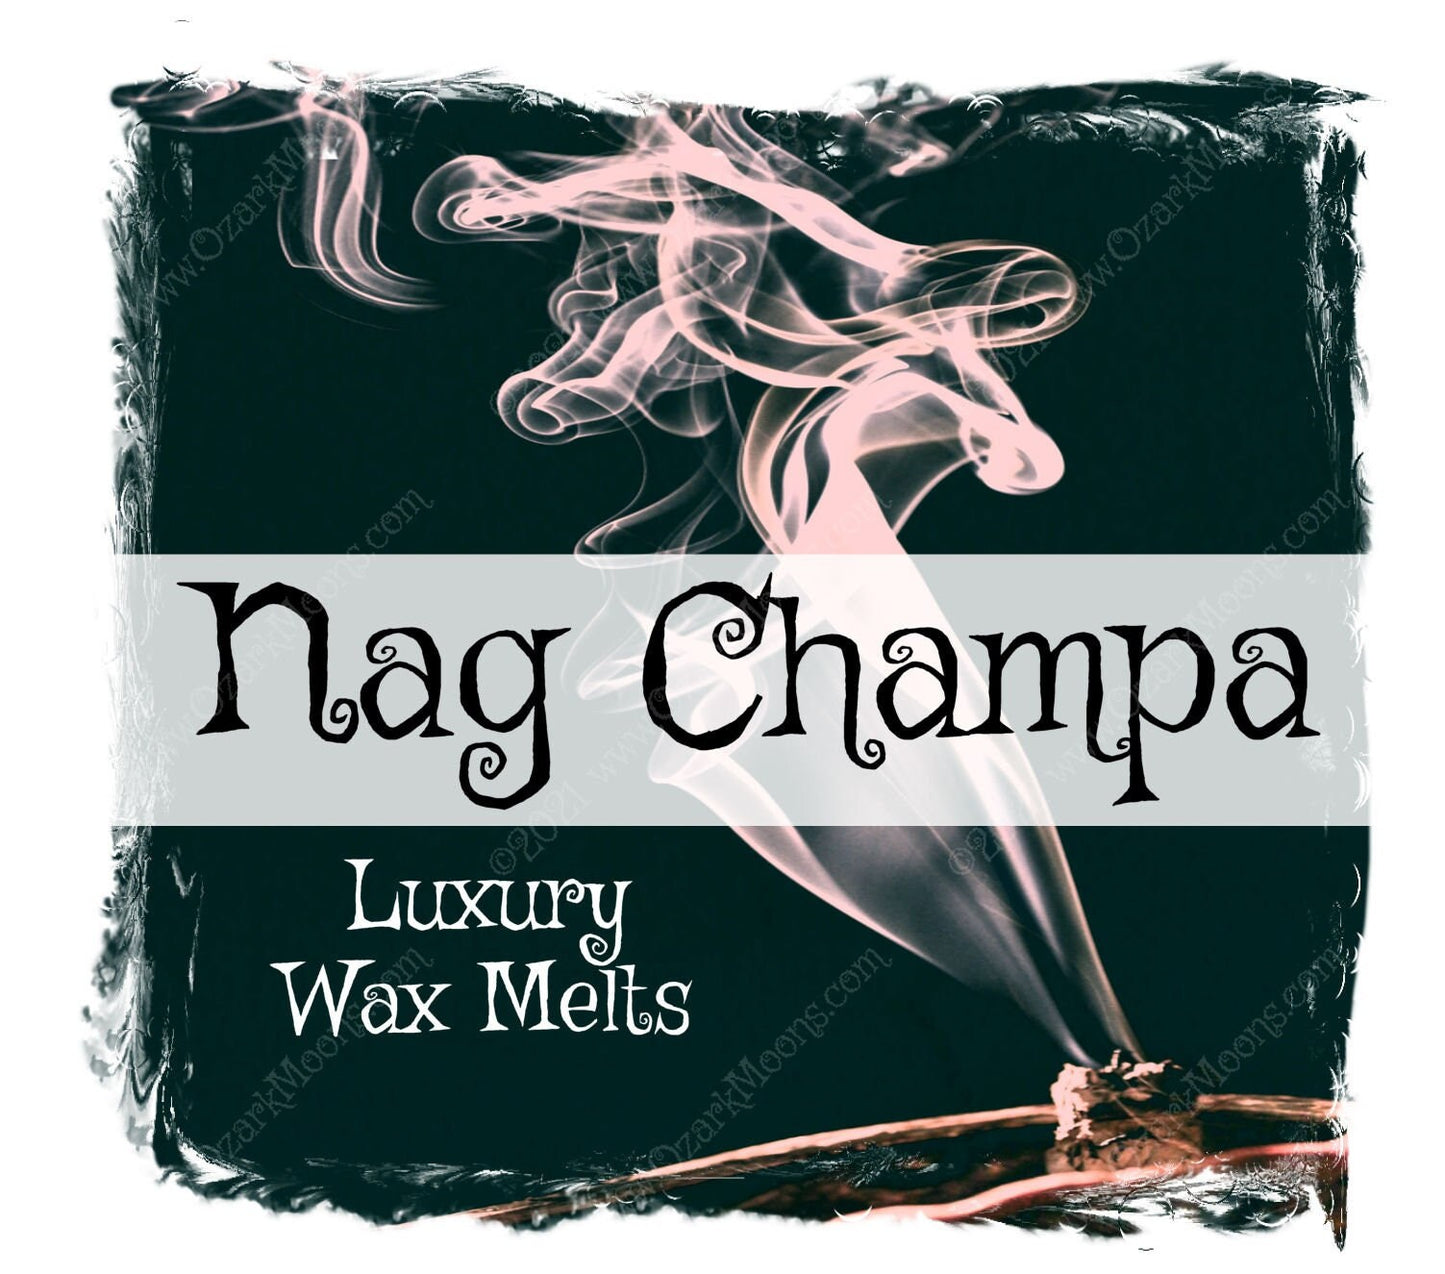 Luxury Wax Melts Nag Champa - Soy Coconut Candle Tarts with Musky Temple Incense and a TRUE Nag Champa Scent